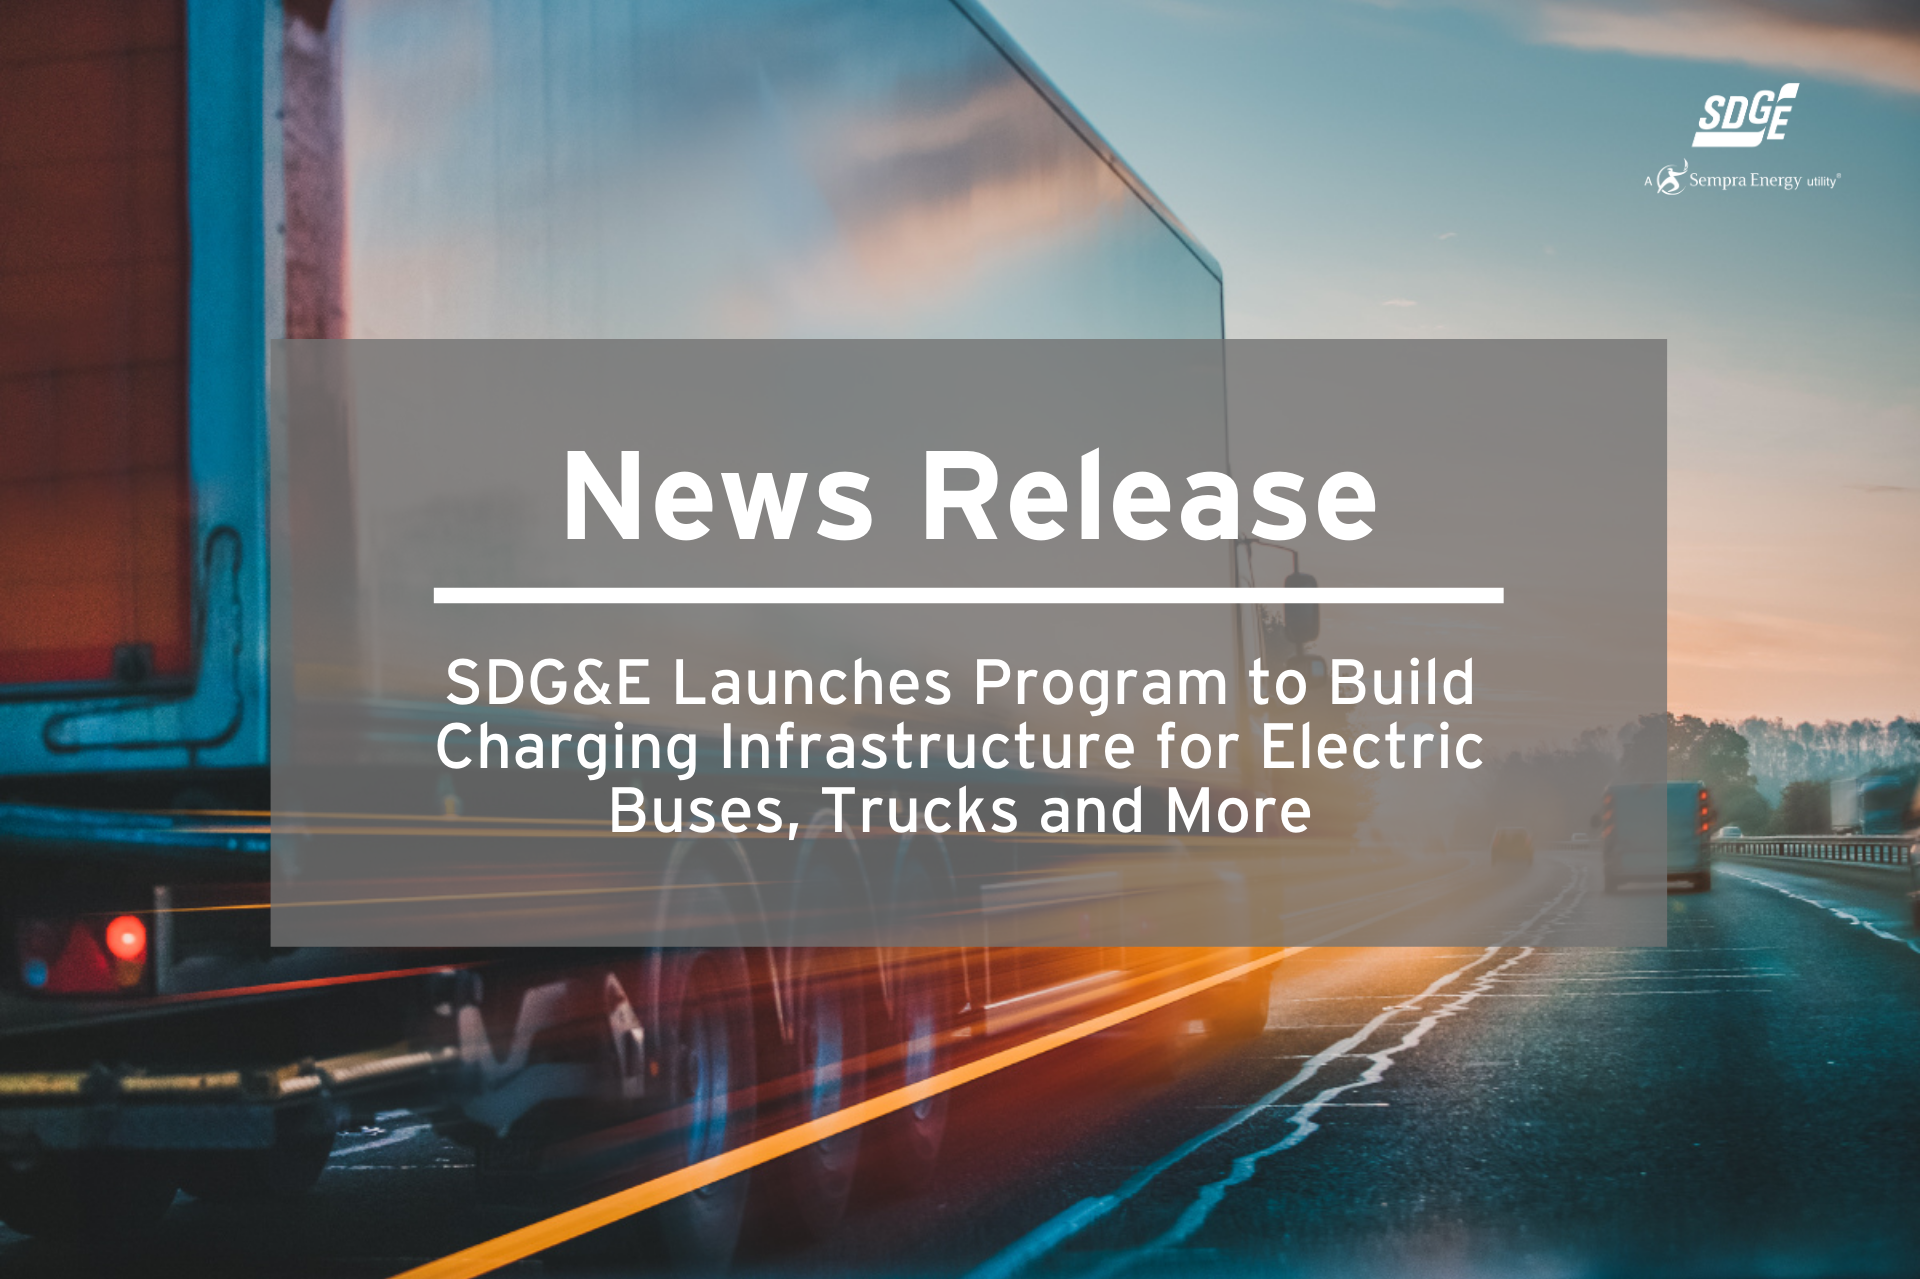 SDG&E Launches Program to Build Charging Infrastructure for Electric Buses, Trucks and More